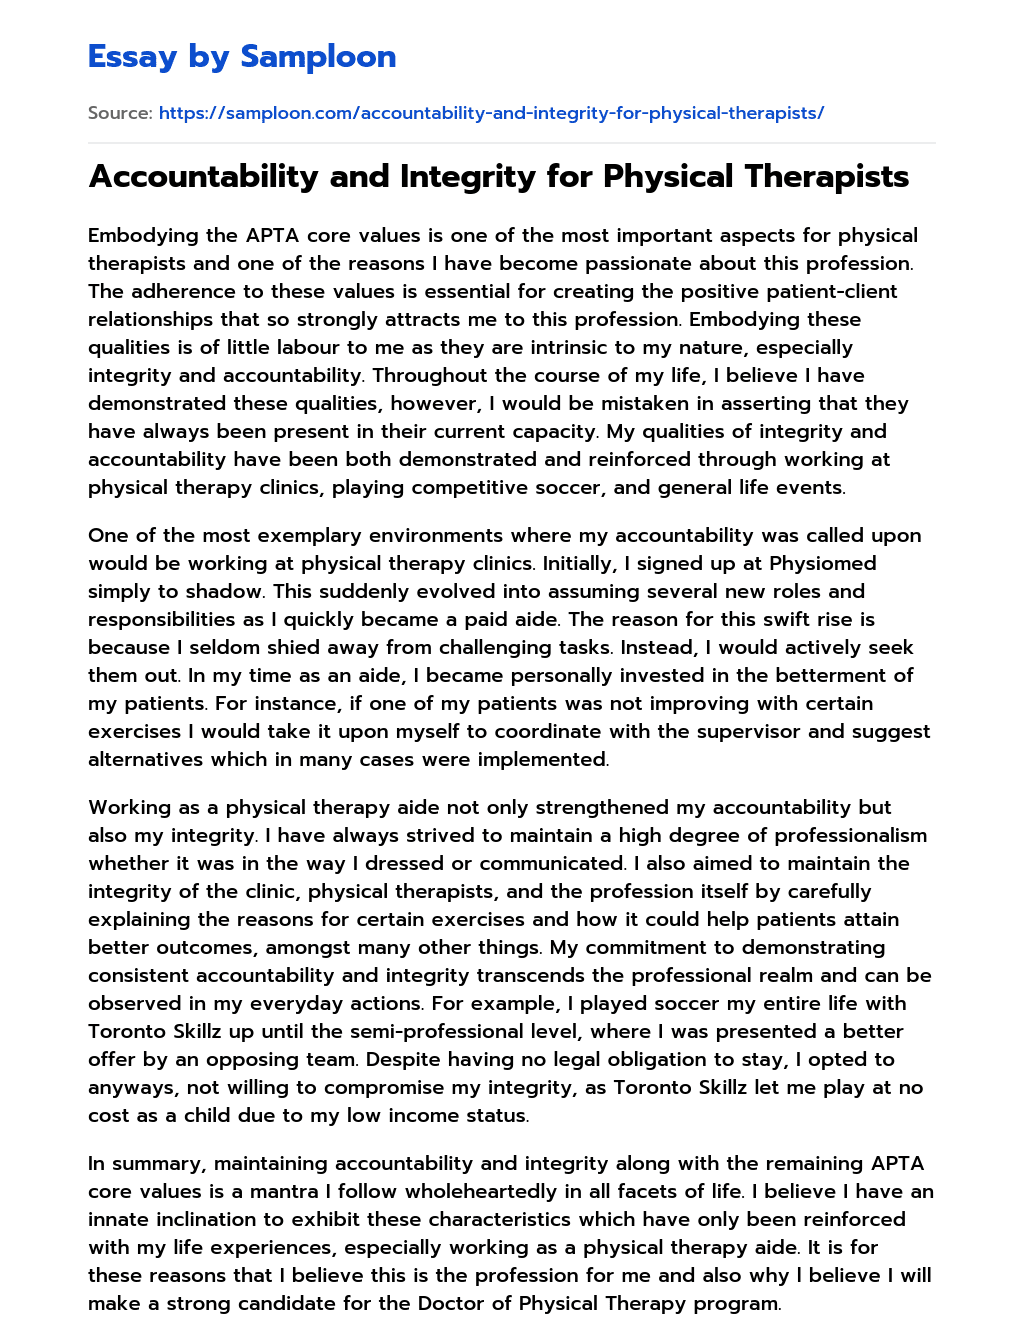 Accountability and Integrity for Physical Therapists essay